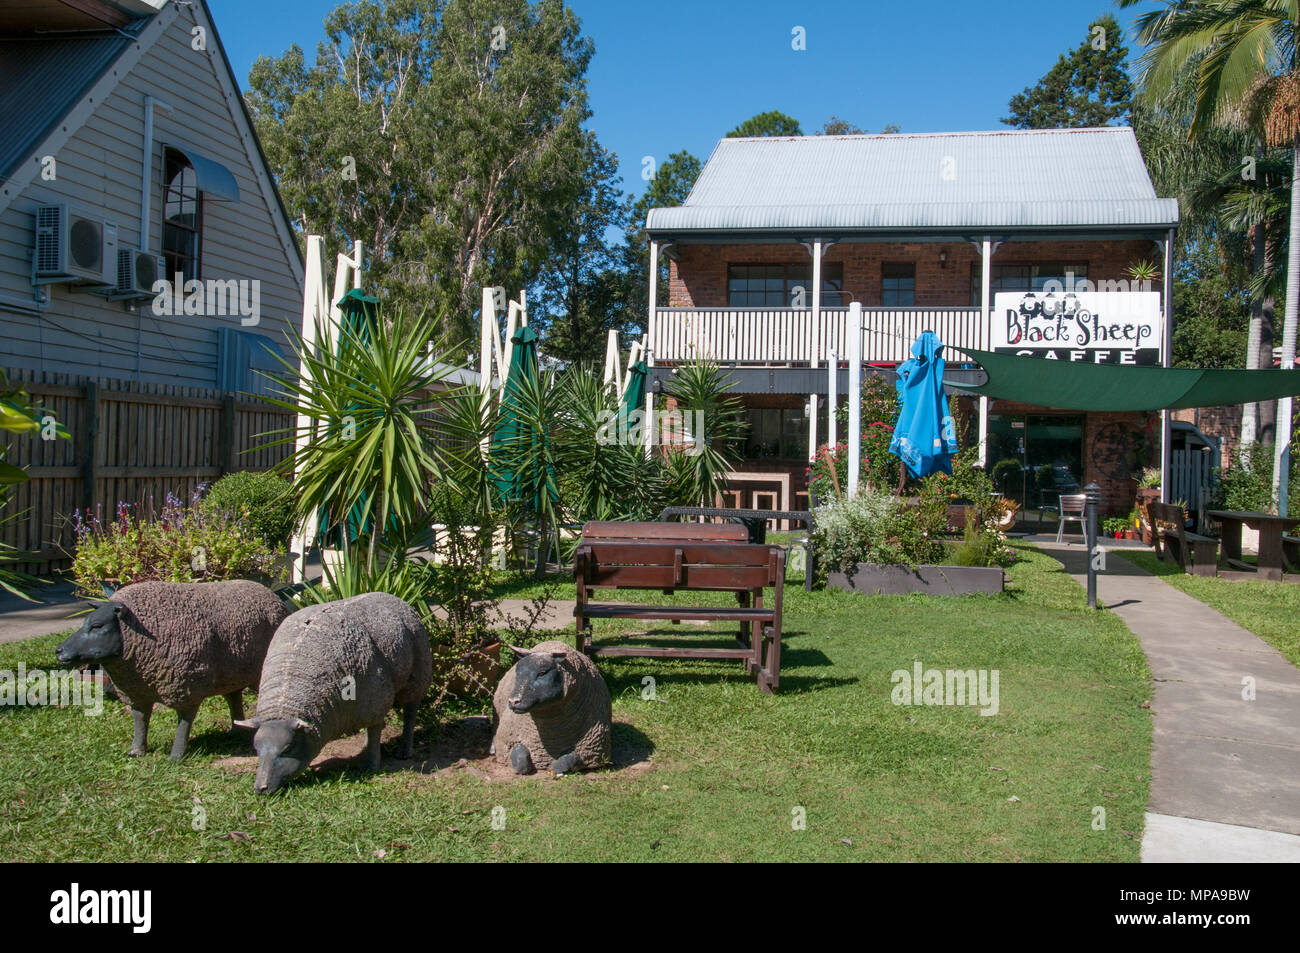 Life-sized sheep replicas draw daytrippers to a local business in Samford, a hill country village outside Brisbane, Queensland, Australia Stock Photo